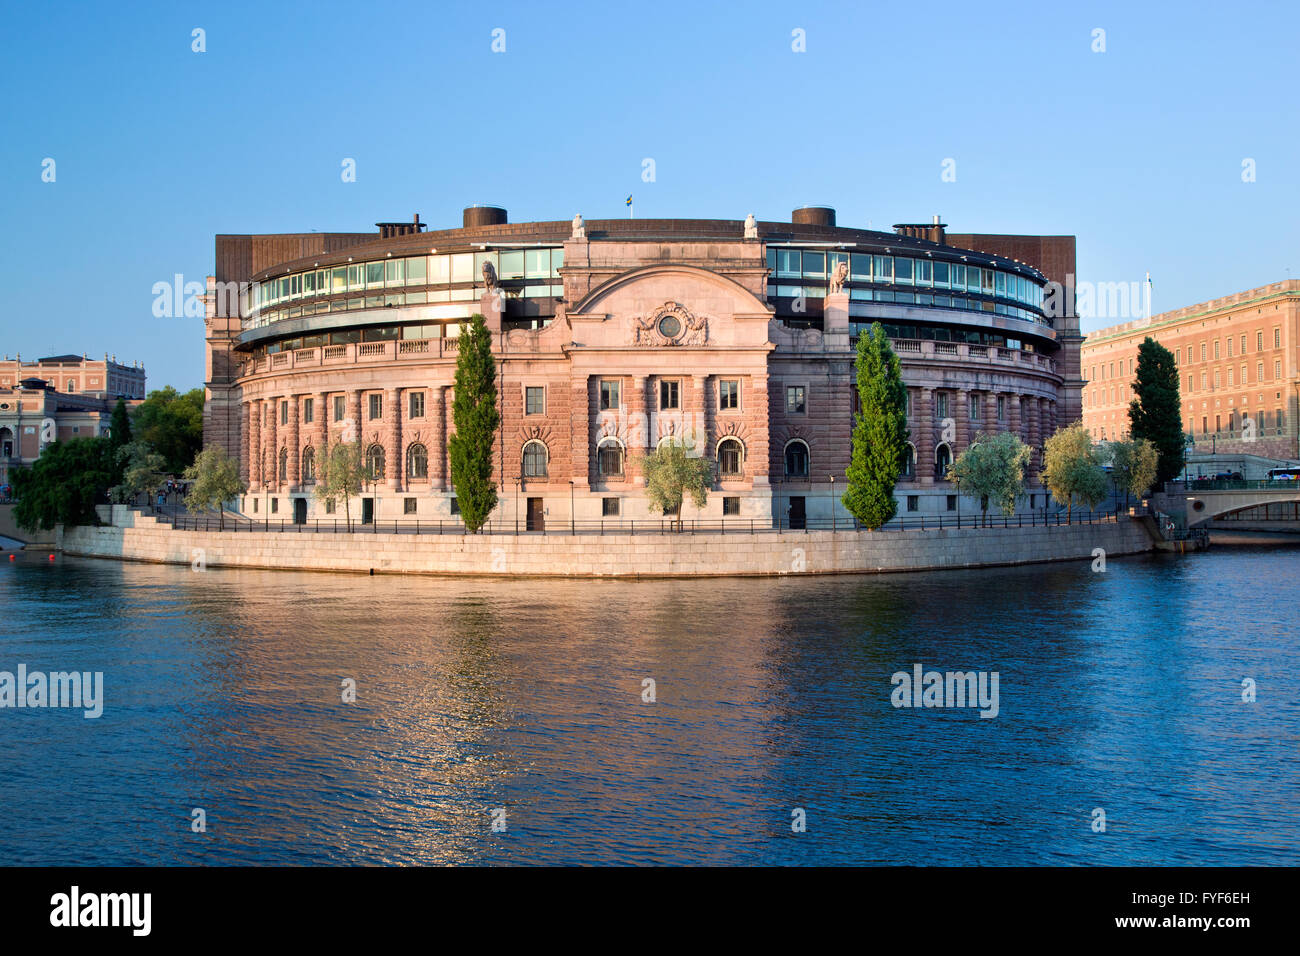 Parliament building in Stockholm, Sweden Stock Photo